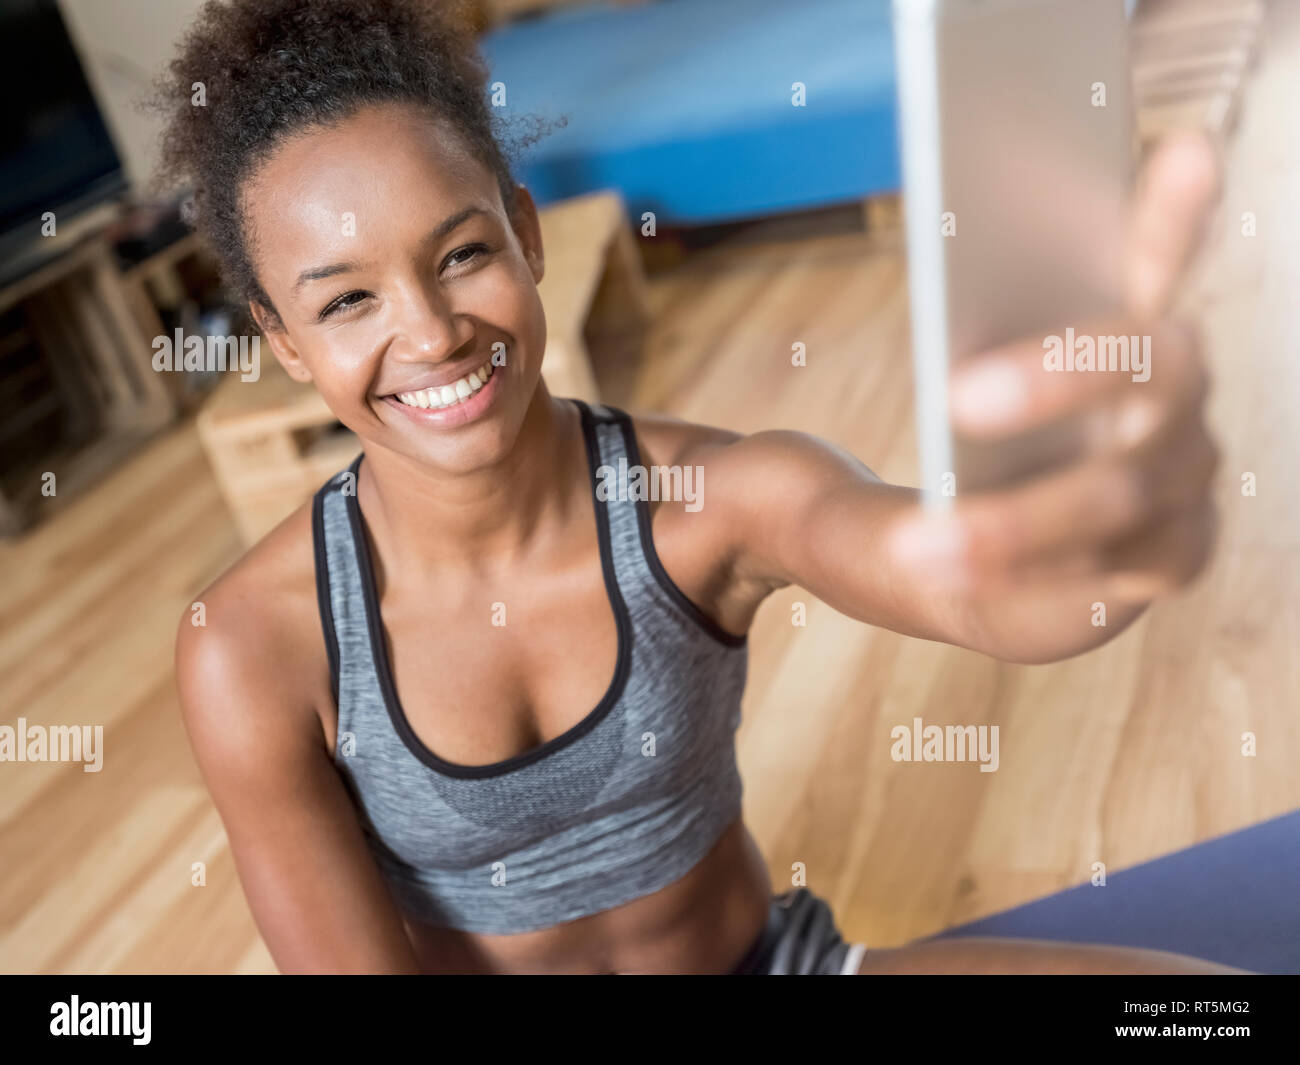 Smiling young woman in sportswear taking a selfie Stock Photo